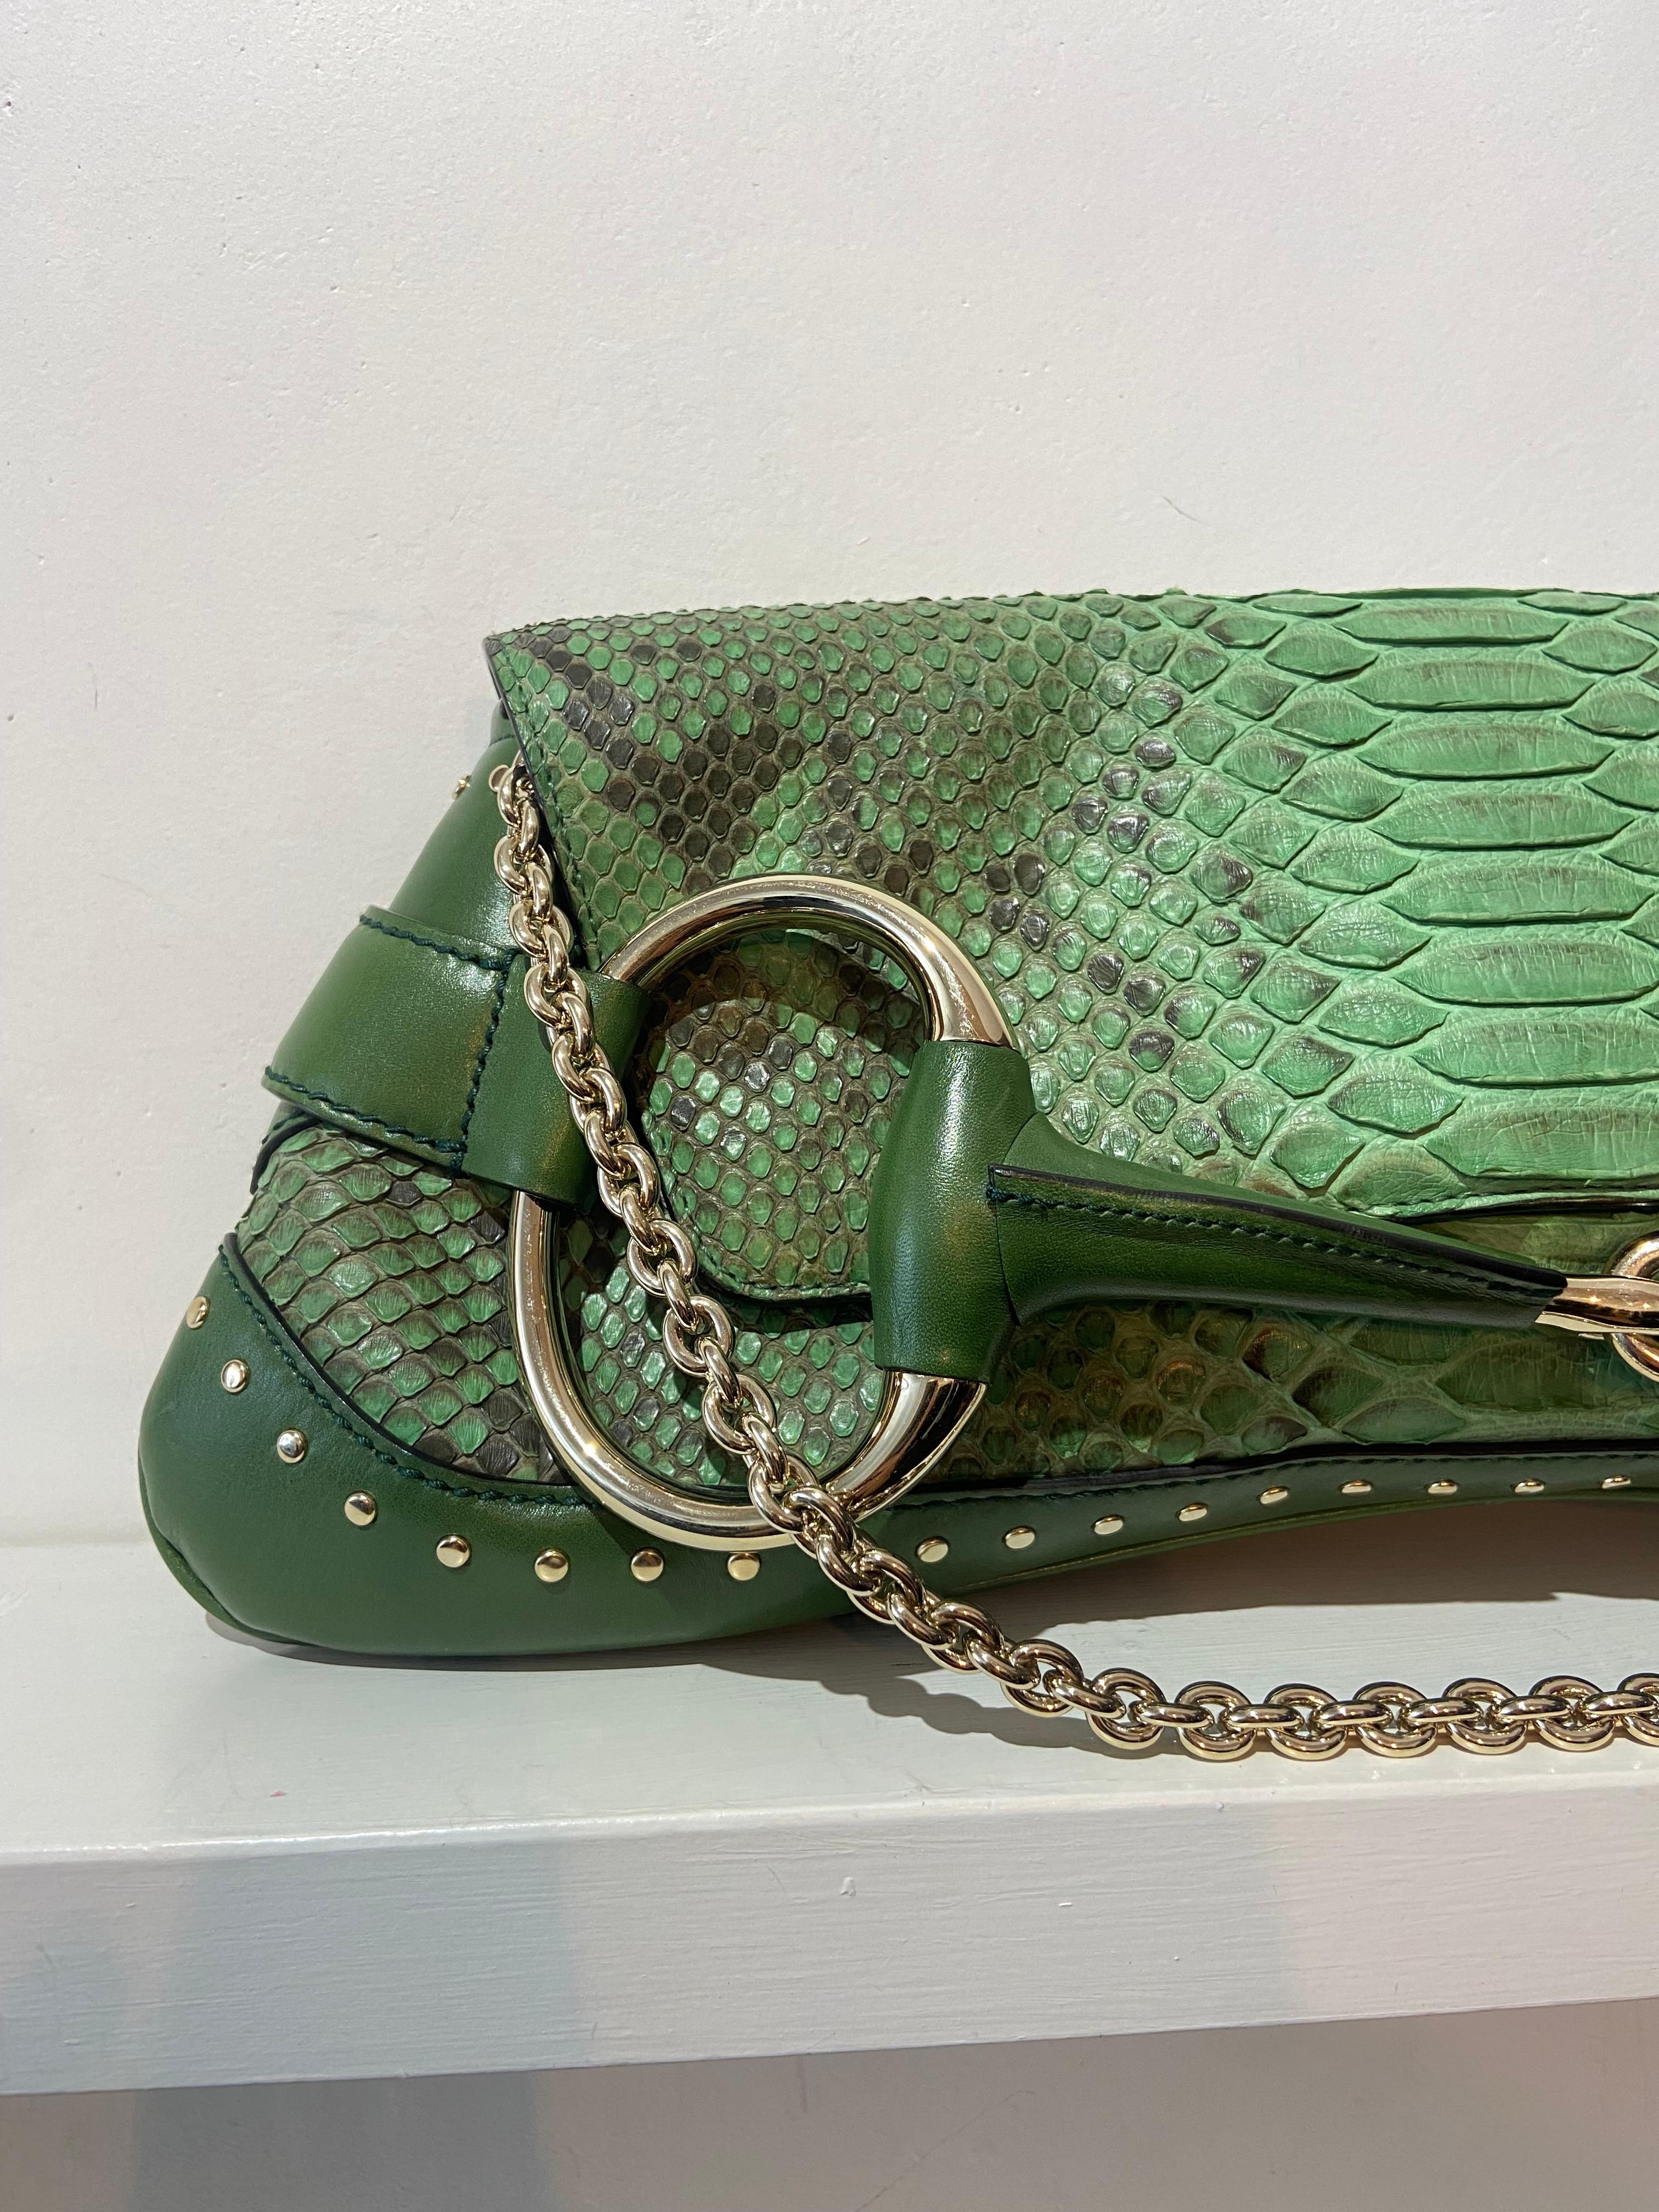 Vintage Gucci by Tom Ford 2004 Green Lizard Clutch In Excellent Condition For Sale In London, GB